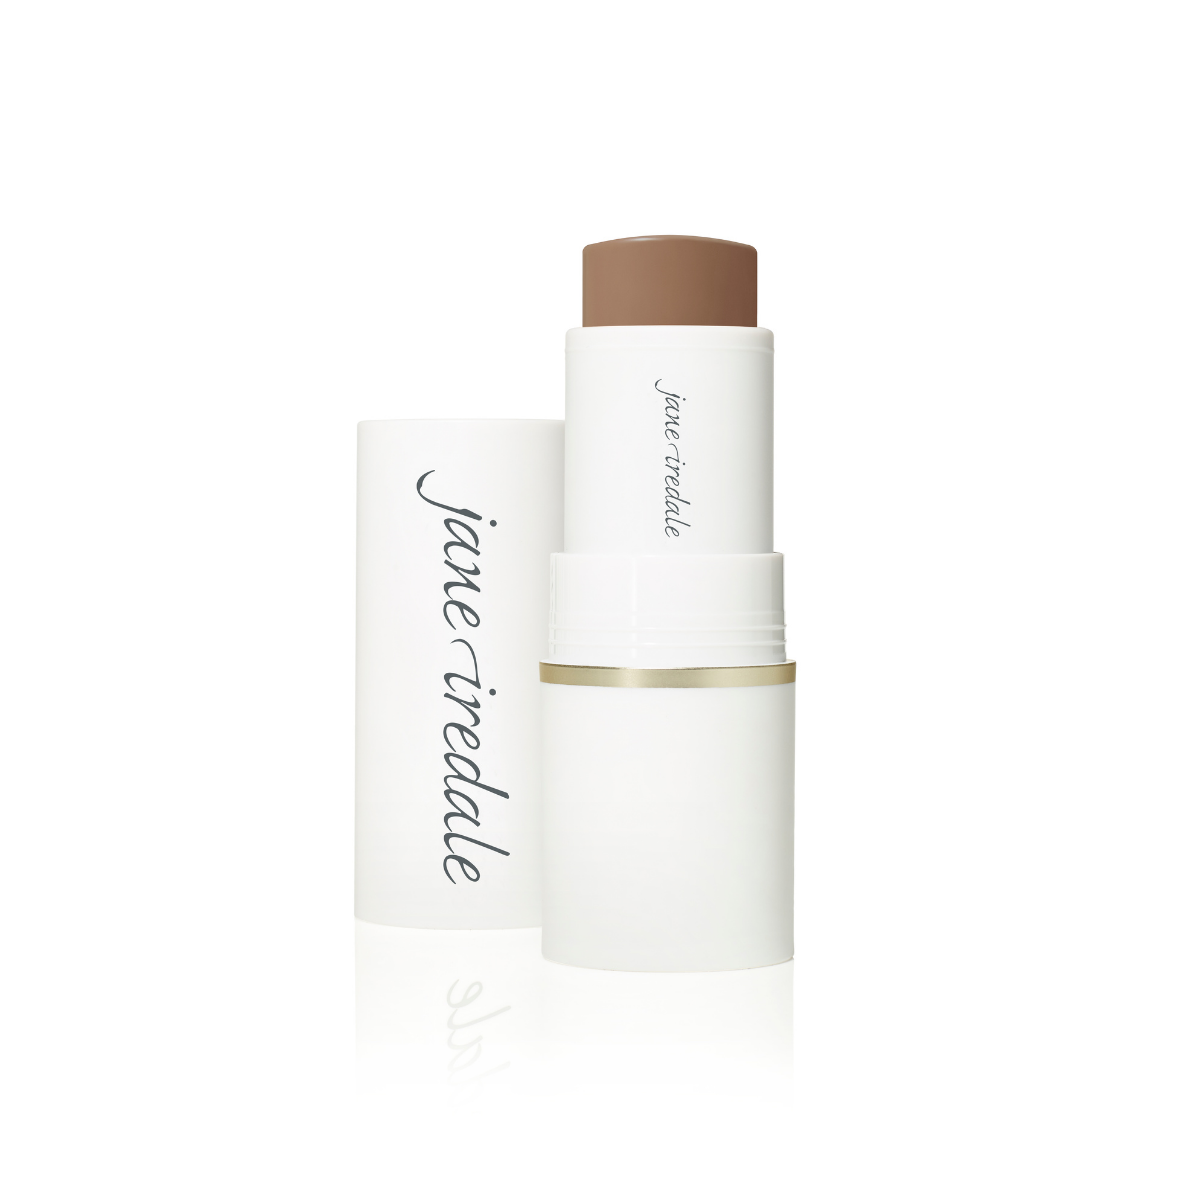 Jane Iredale Glow Time Bronzer Stick in Sizzle Shop at Exclusive Beauty